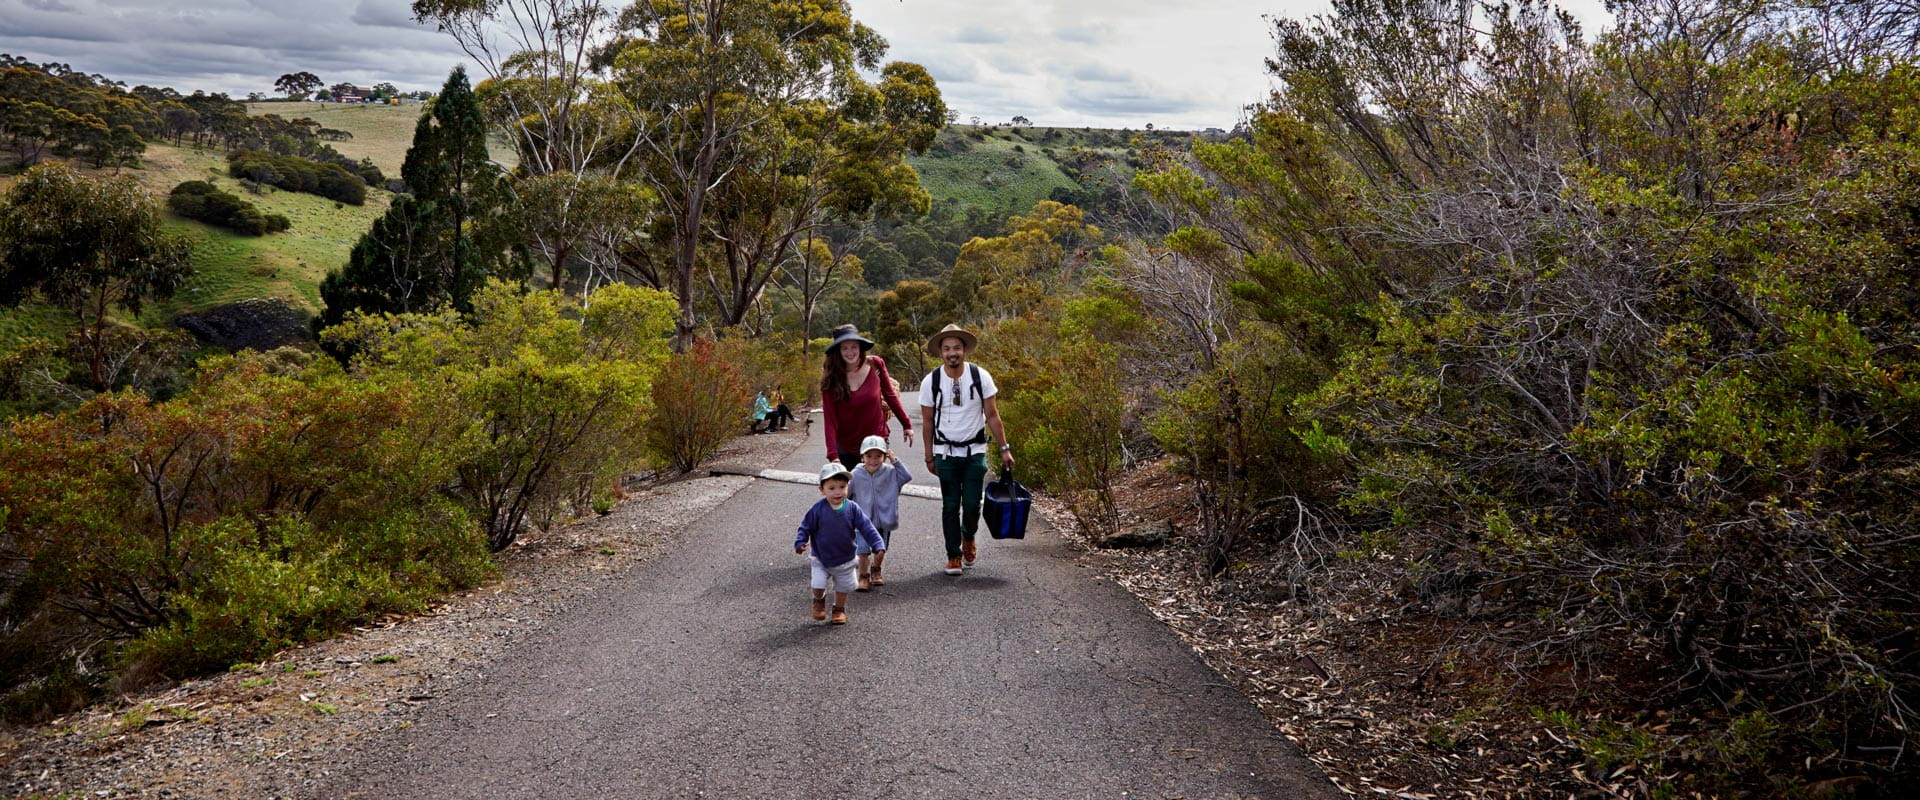 A family with two young children walk up a road path bordered by shrubs, with trees and rolling hills behind them.